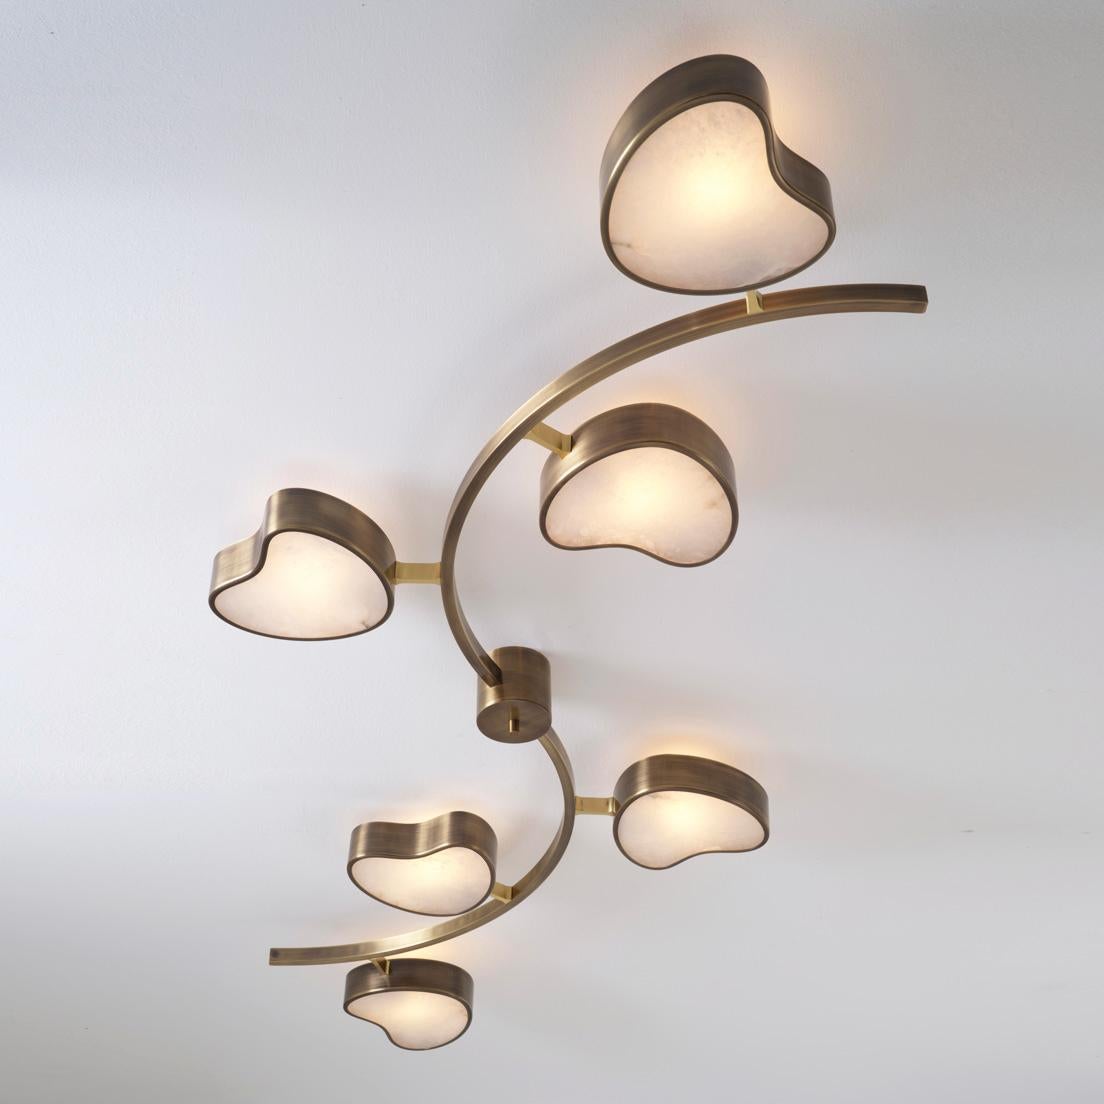 Cuore N.6 Ceiling Light by Gaspare Asaro. Satin Brass and Sand White Finish For Sale 4